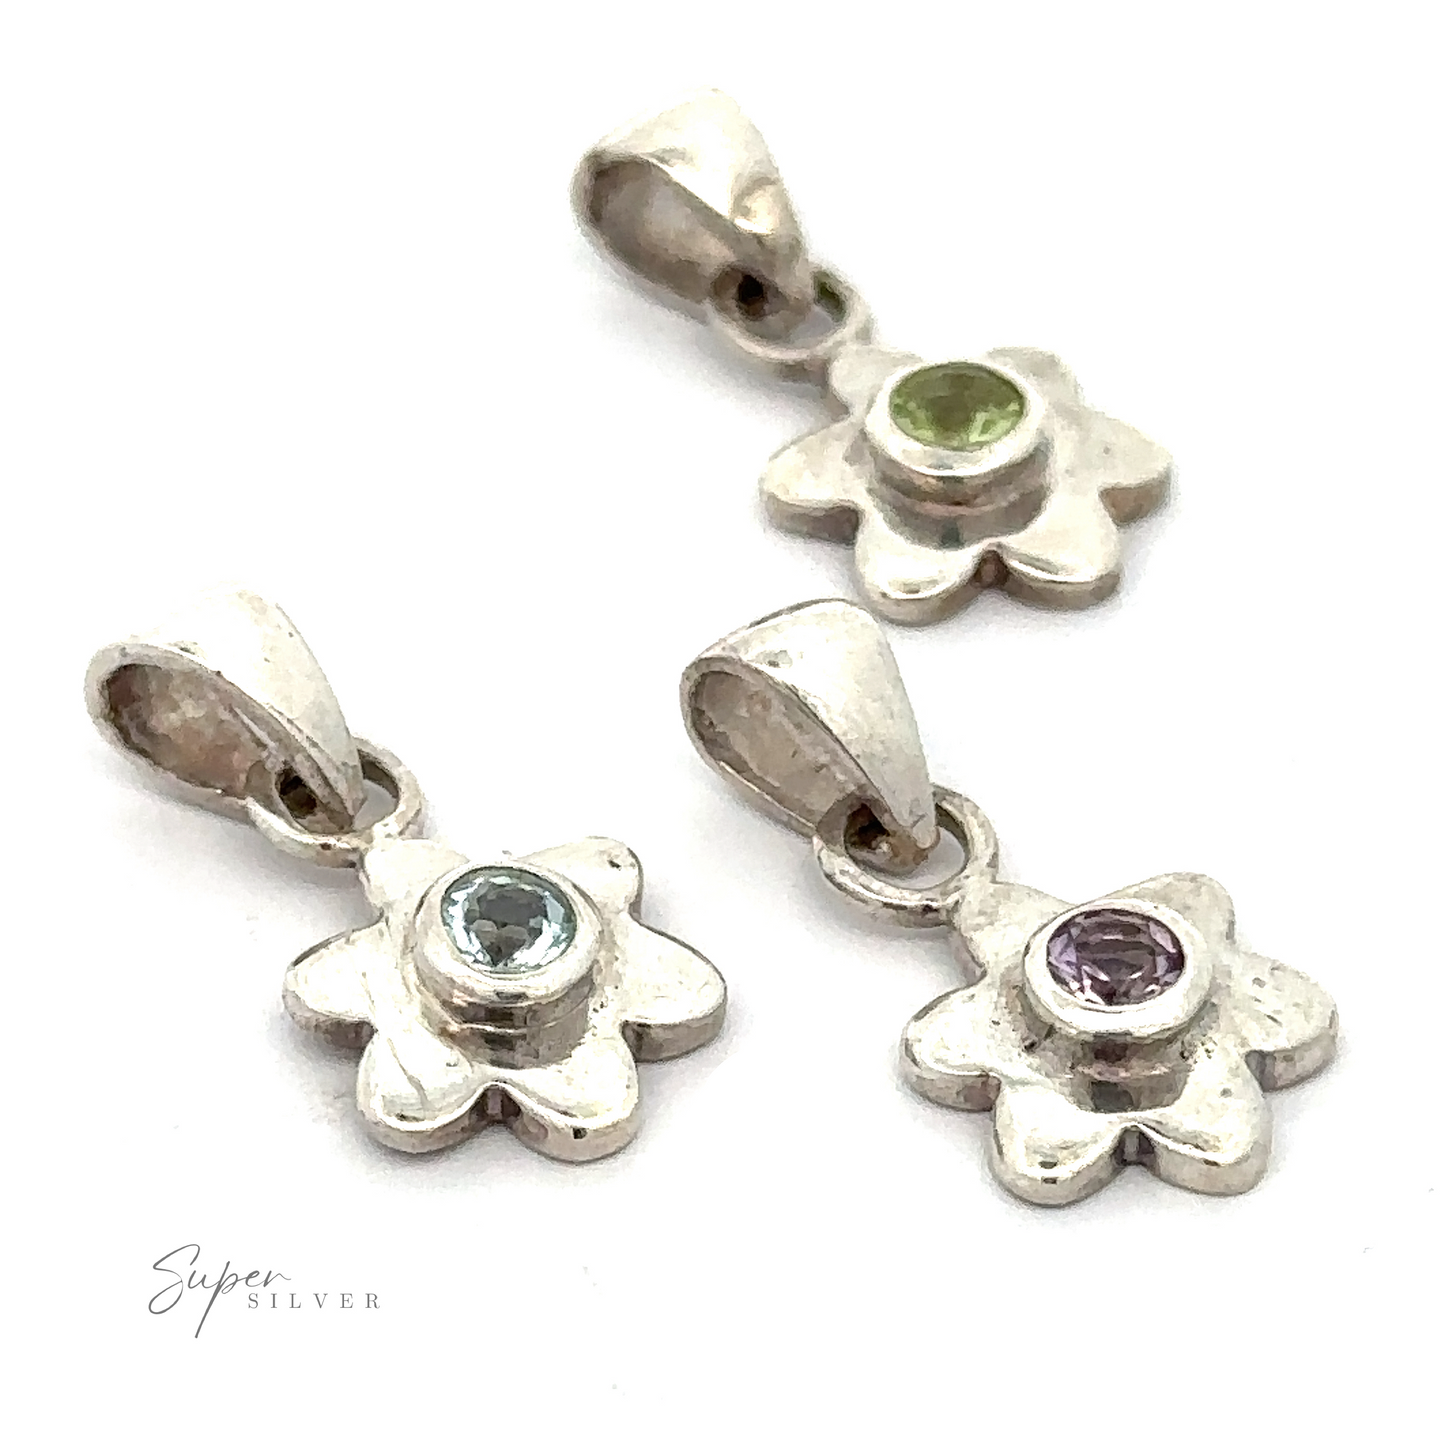 
                  
                    Three Tiny Gemstone Flower Pendants, each featuring a unique gemstone center in green, light blue, and purple, arranged on a white background.
                  
                